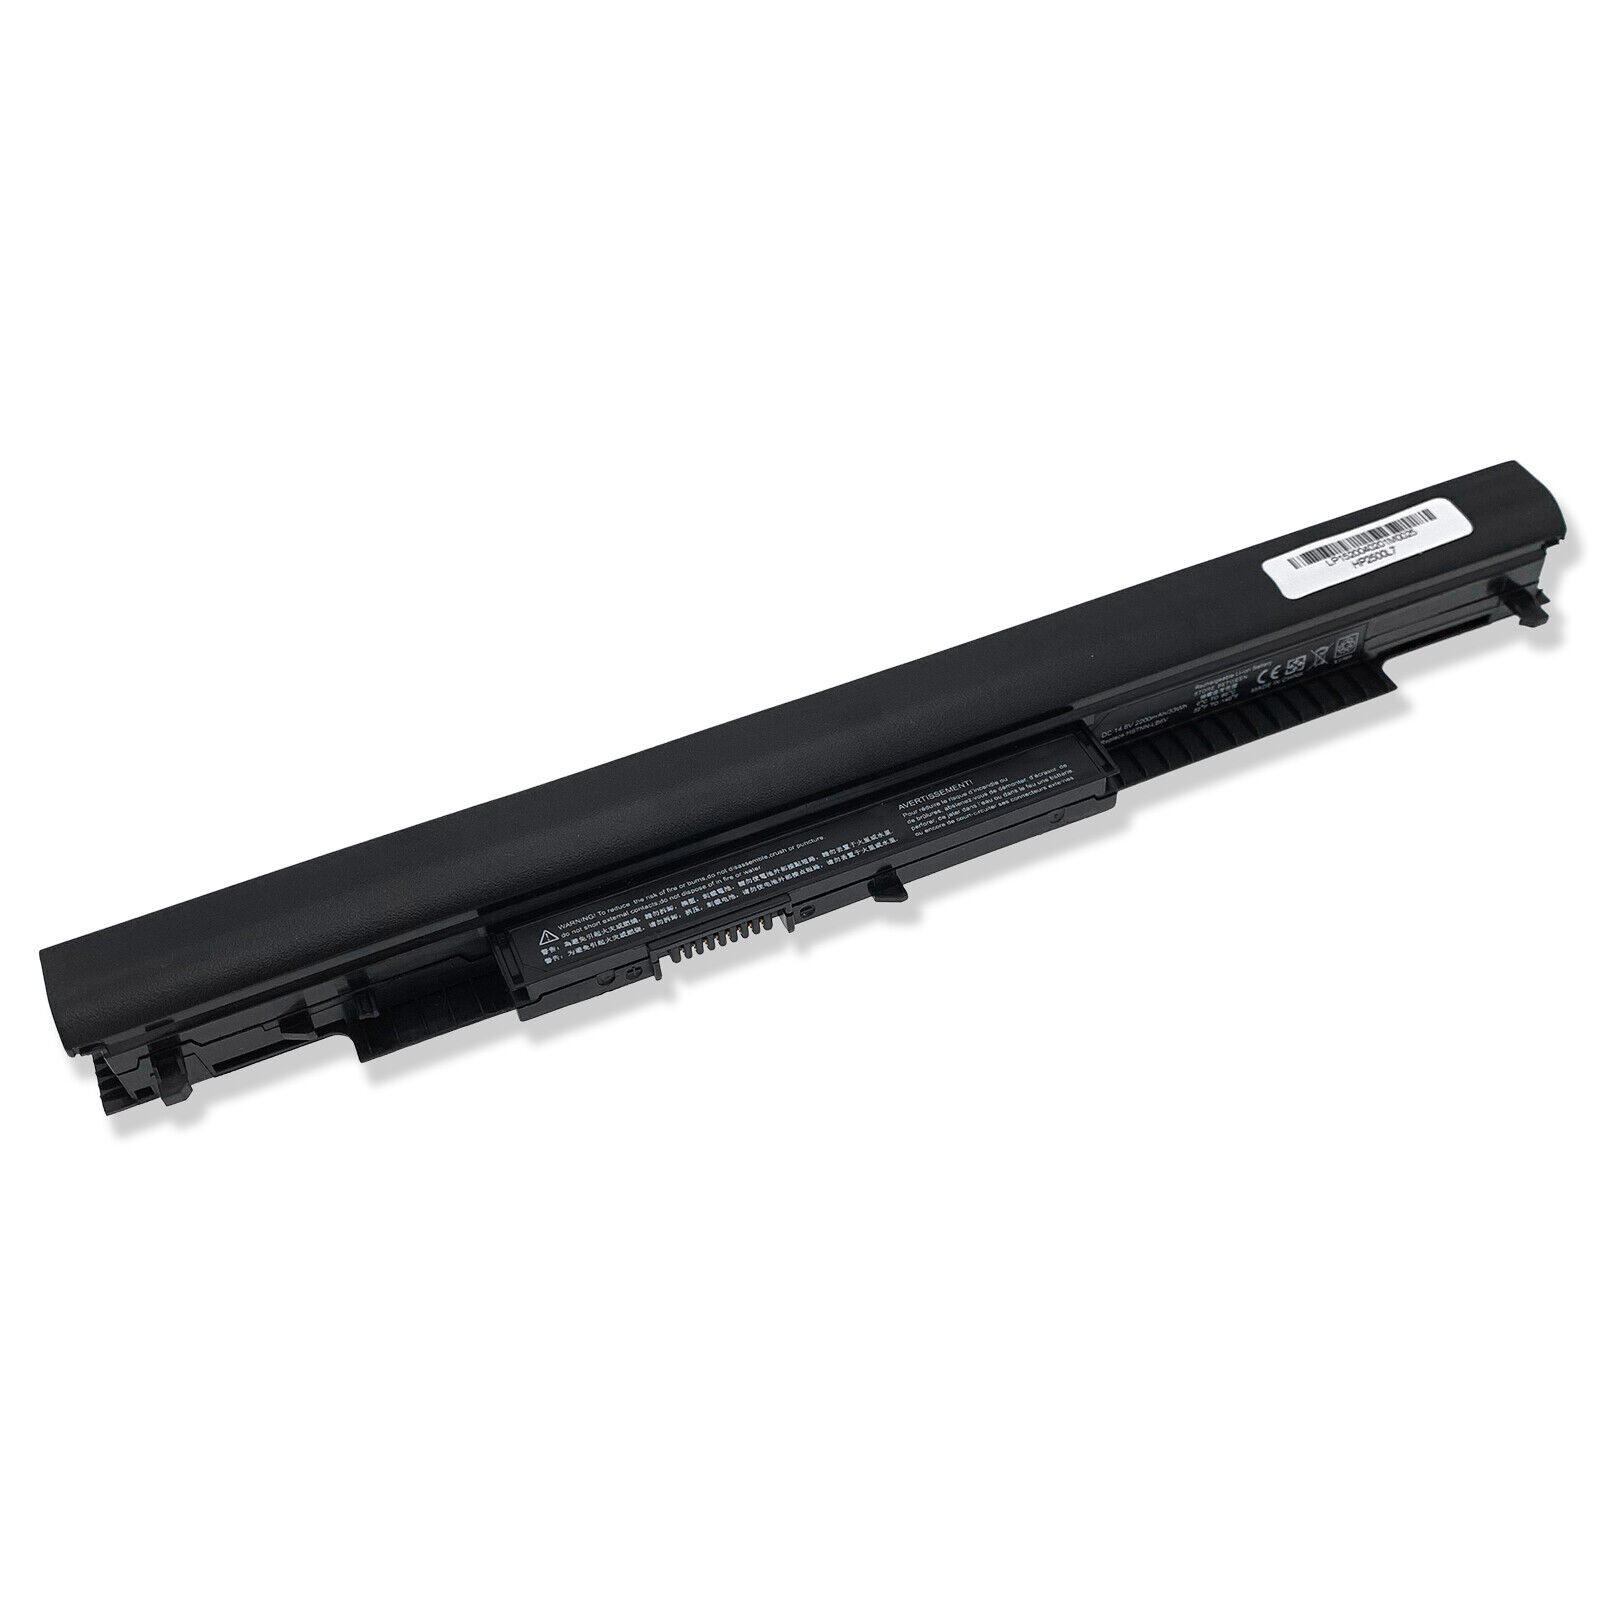 New Battery For HP Pavilion 17-X037CL 17-X061NR 17-Y013CY 17-Y032CY 15-AC142DX